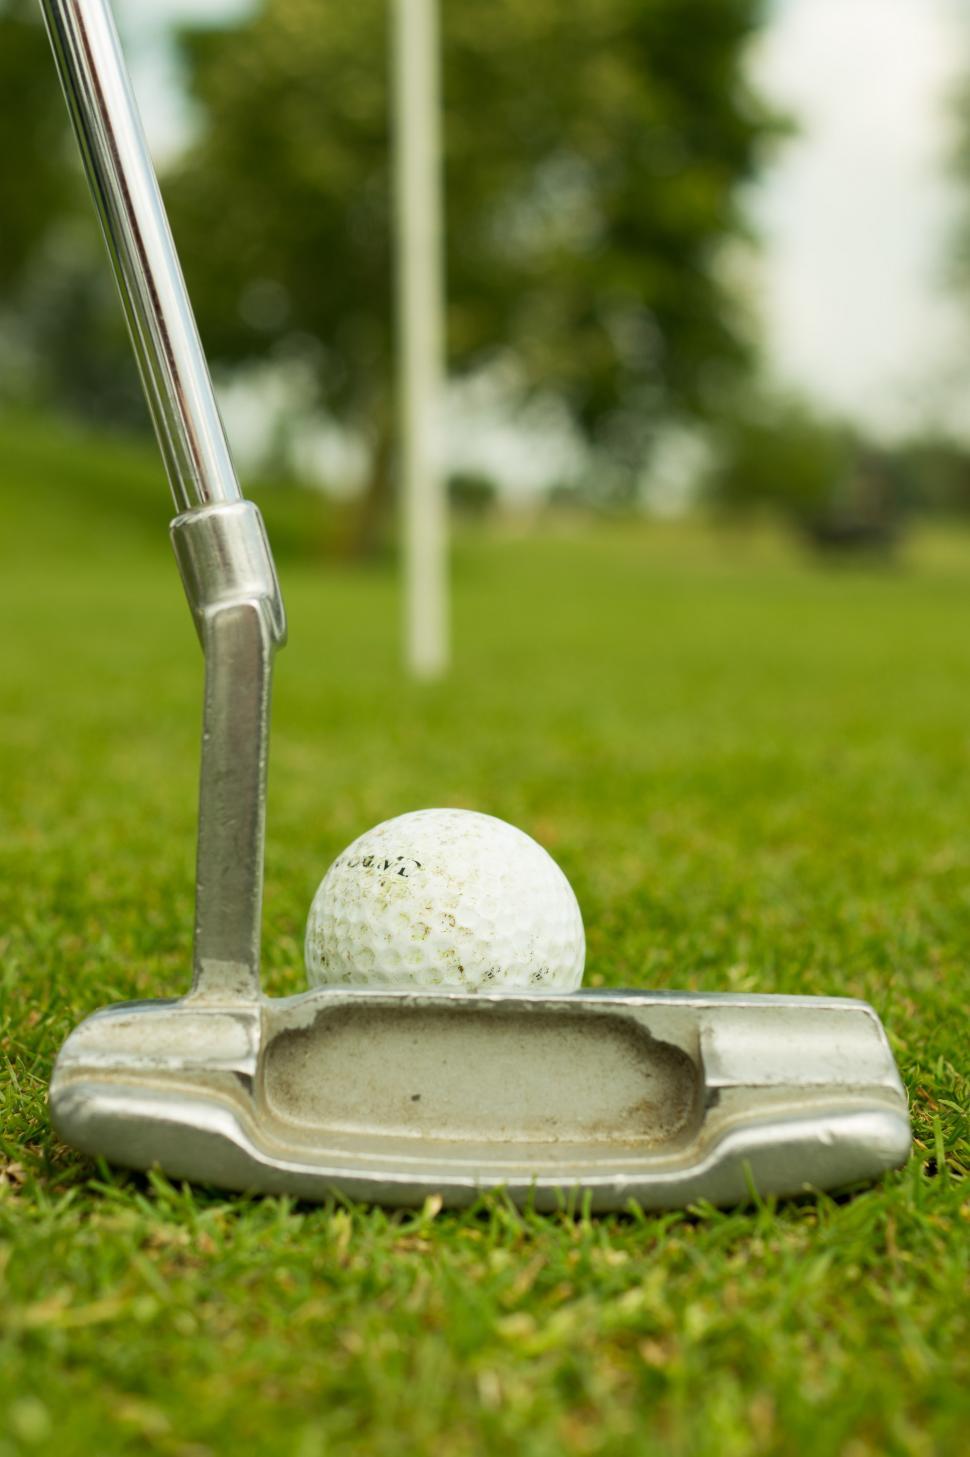 Free Image of Golf Ball Rolling on Putt Putt Course 